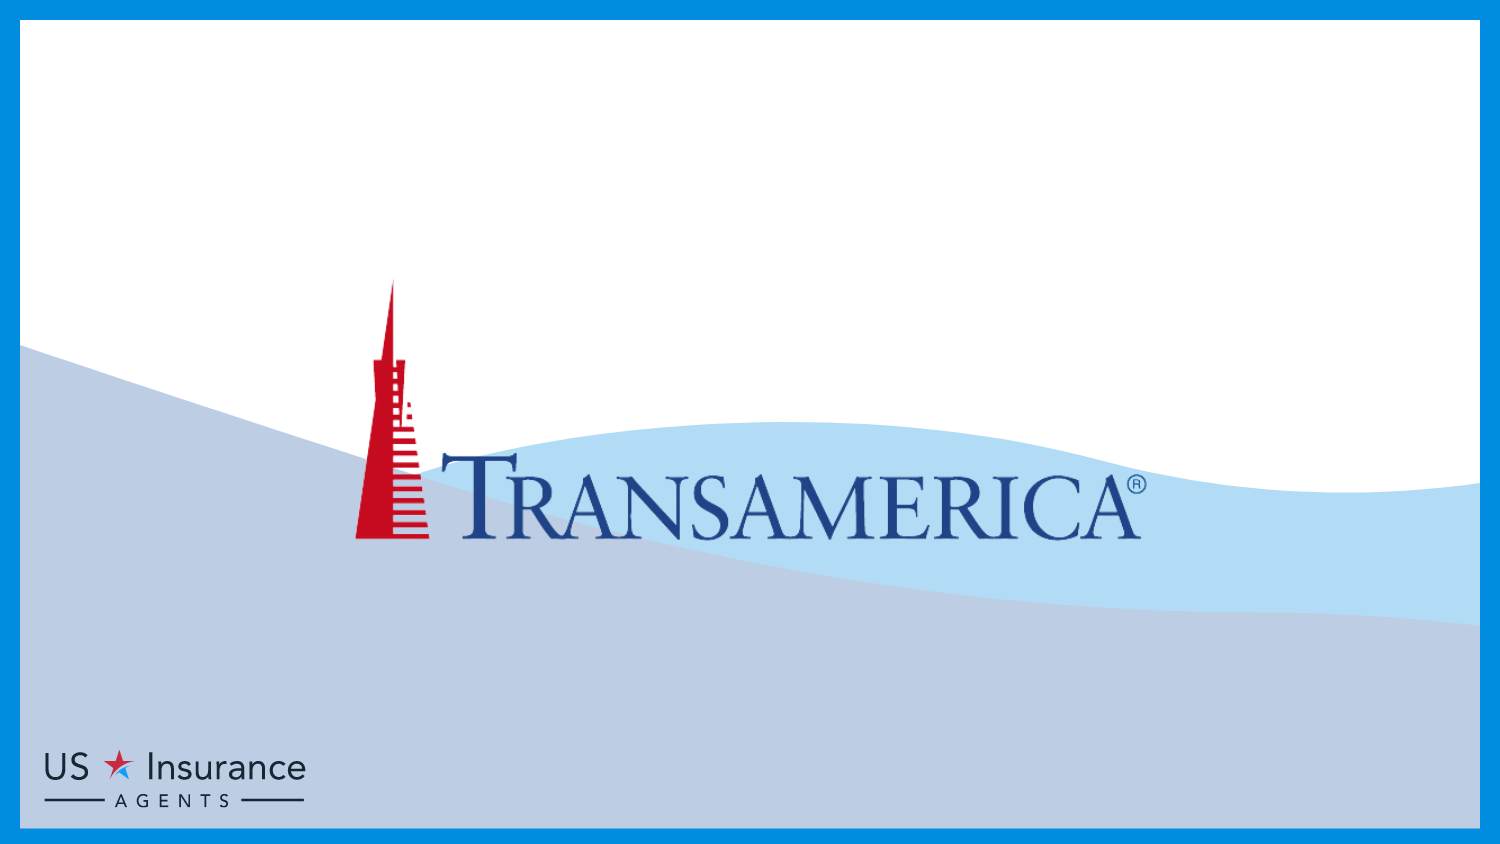 Transamerica: Best Life Insurance for a Child’s Father